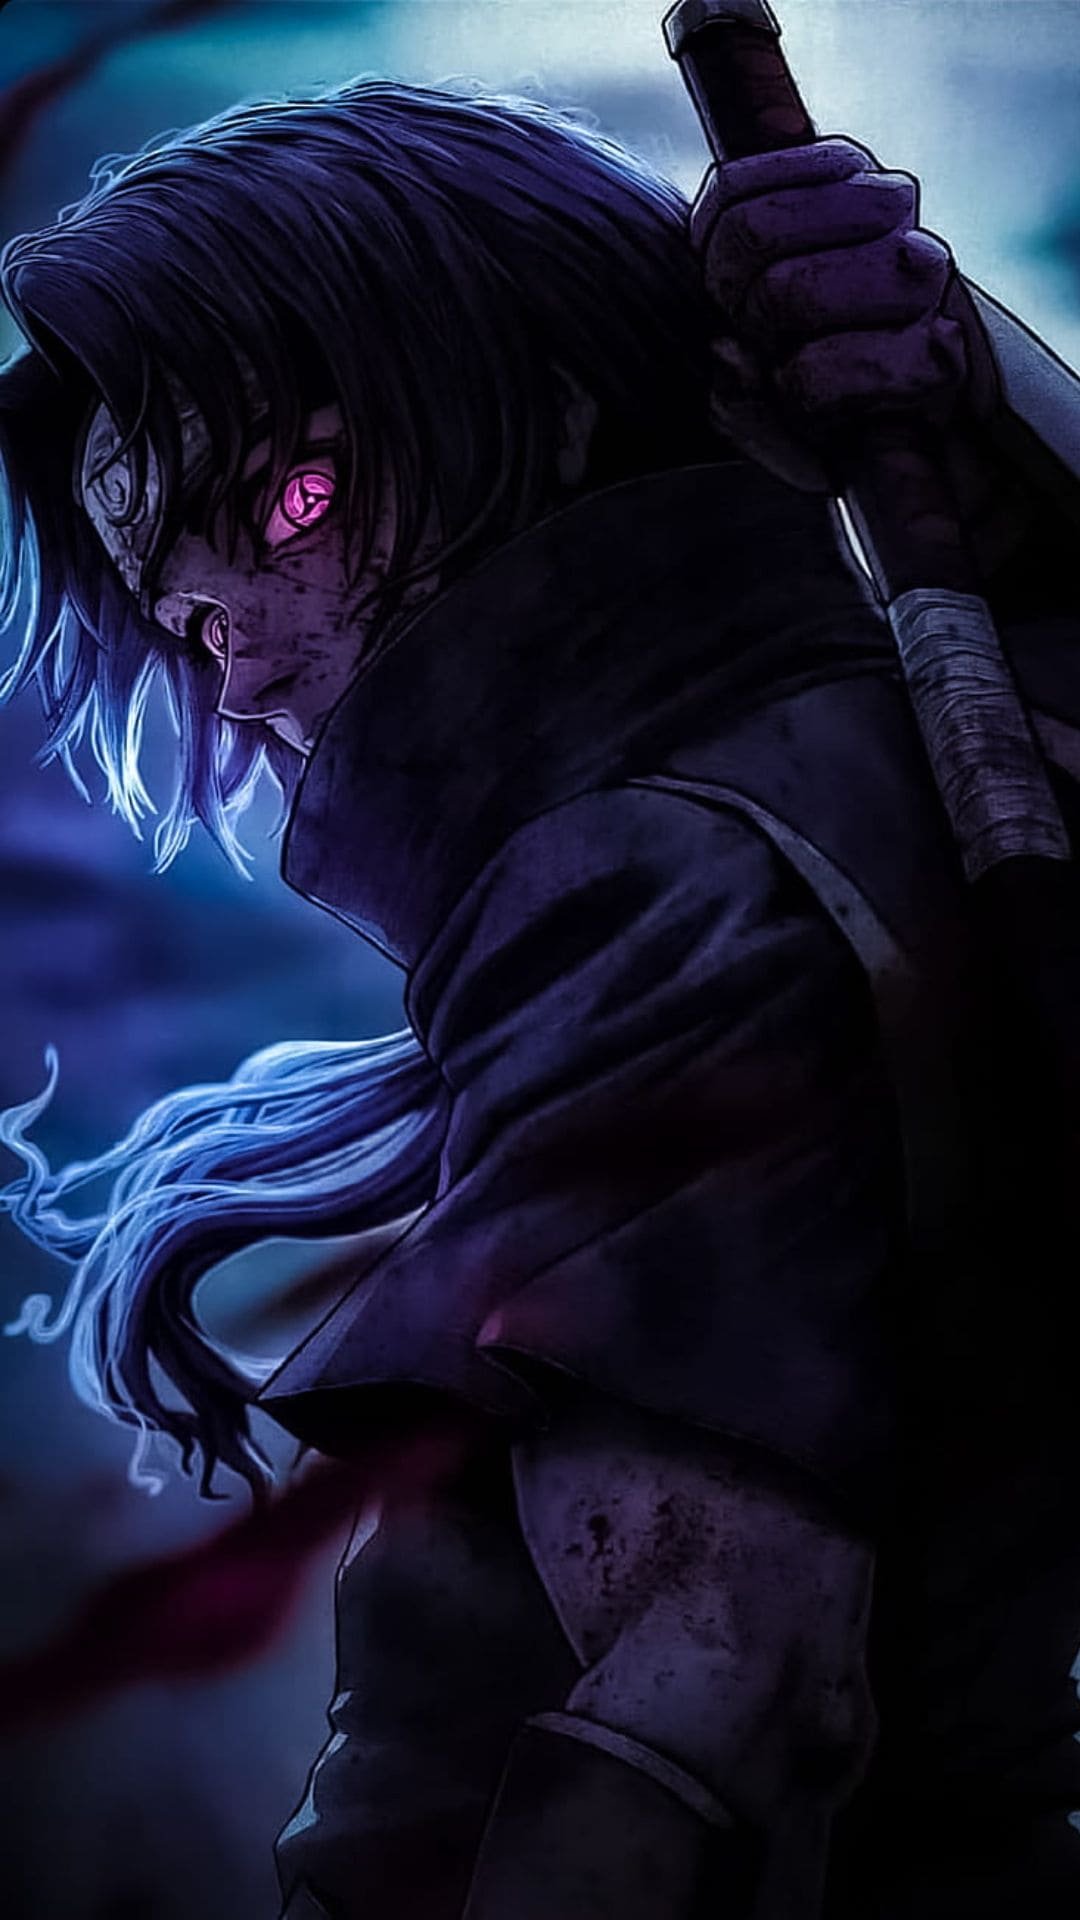 4K Moon iTachi Wallpaper for iPhone Backgrounds from Naruto anime 16